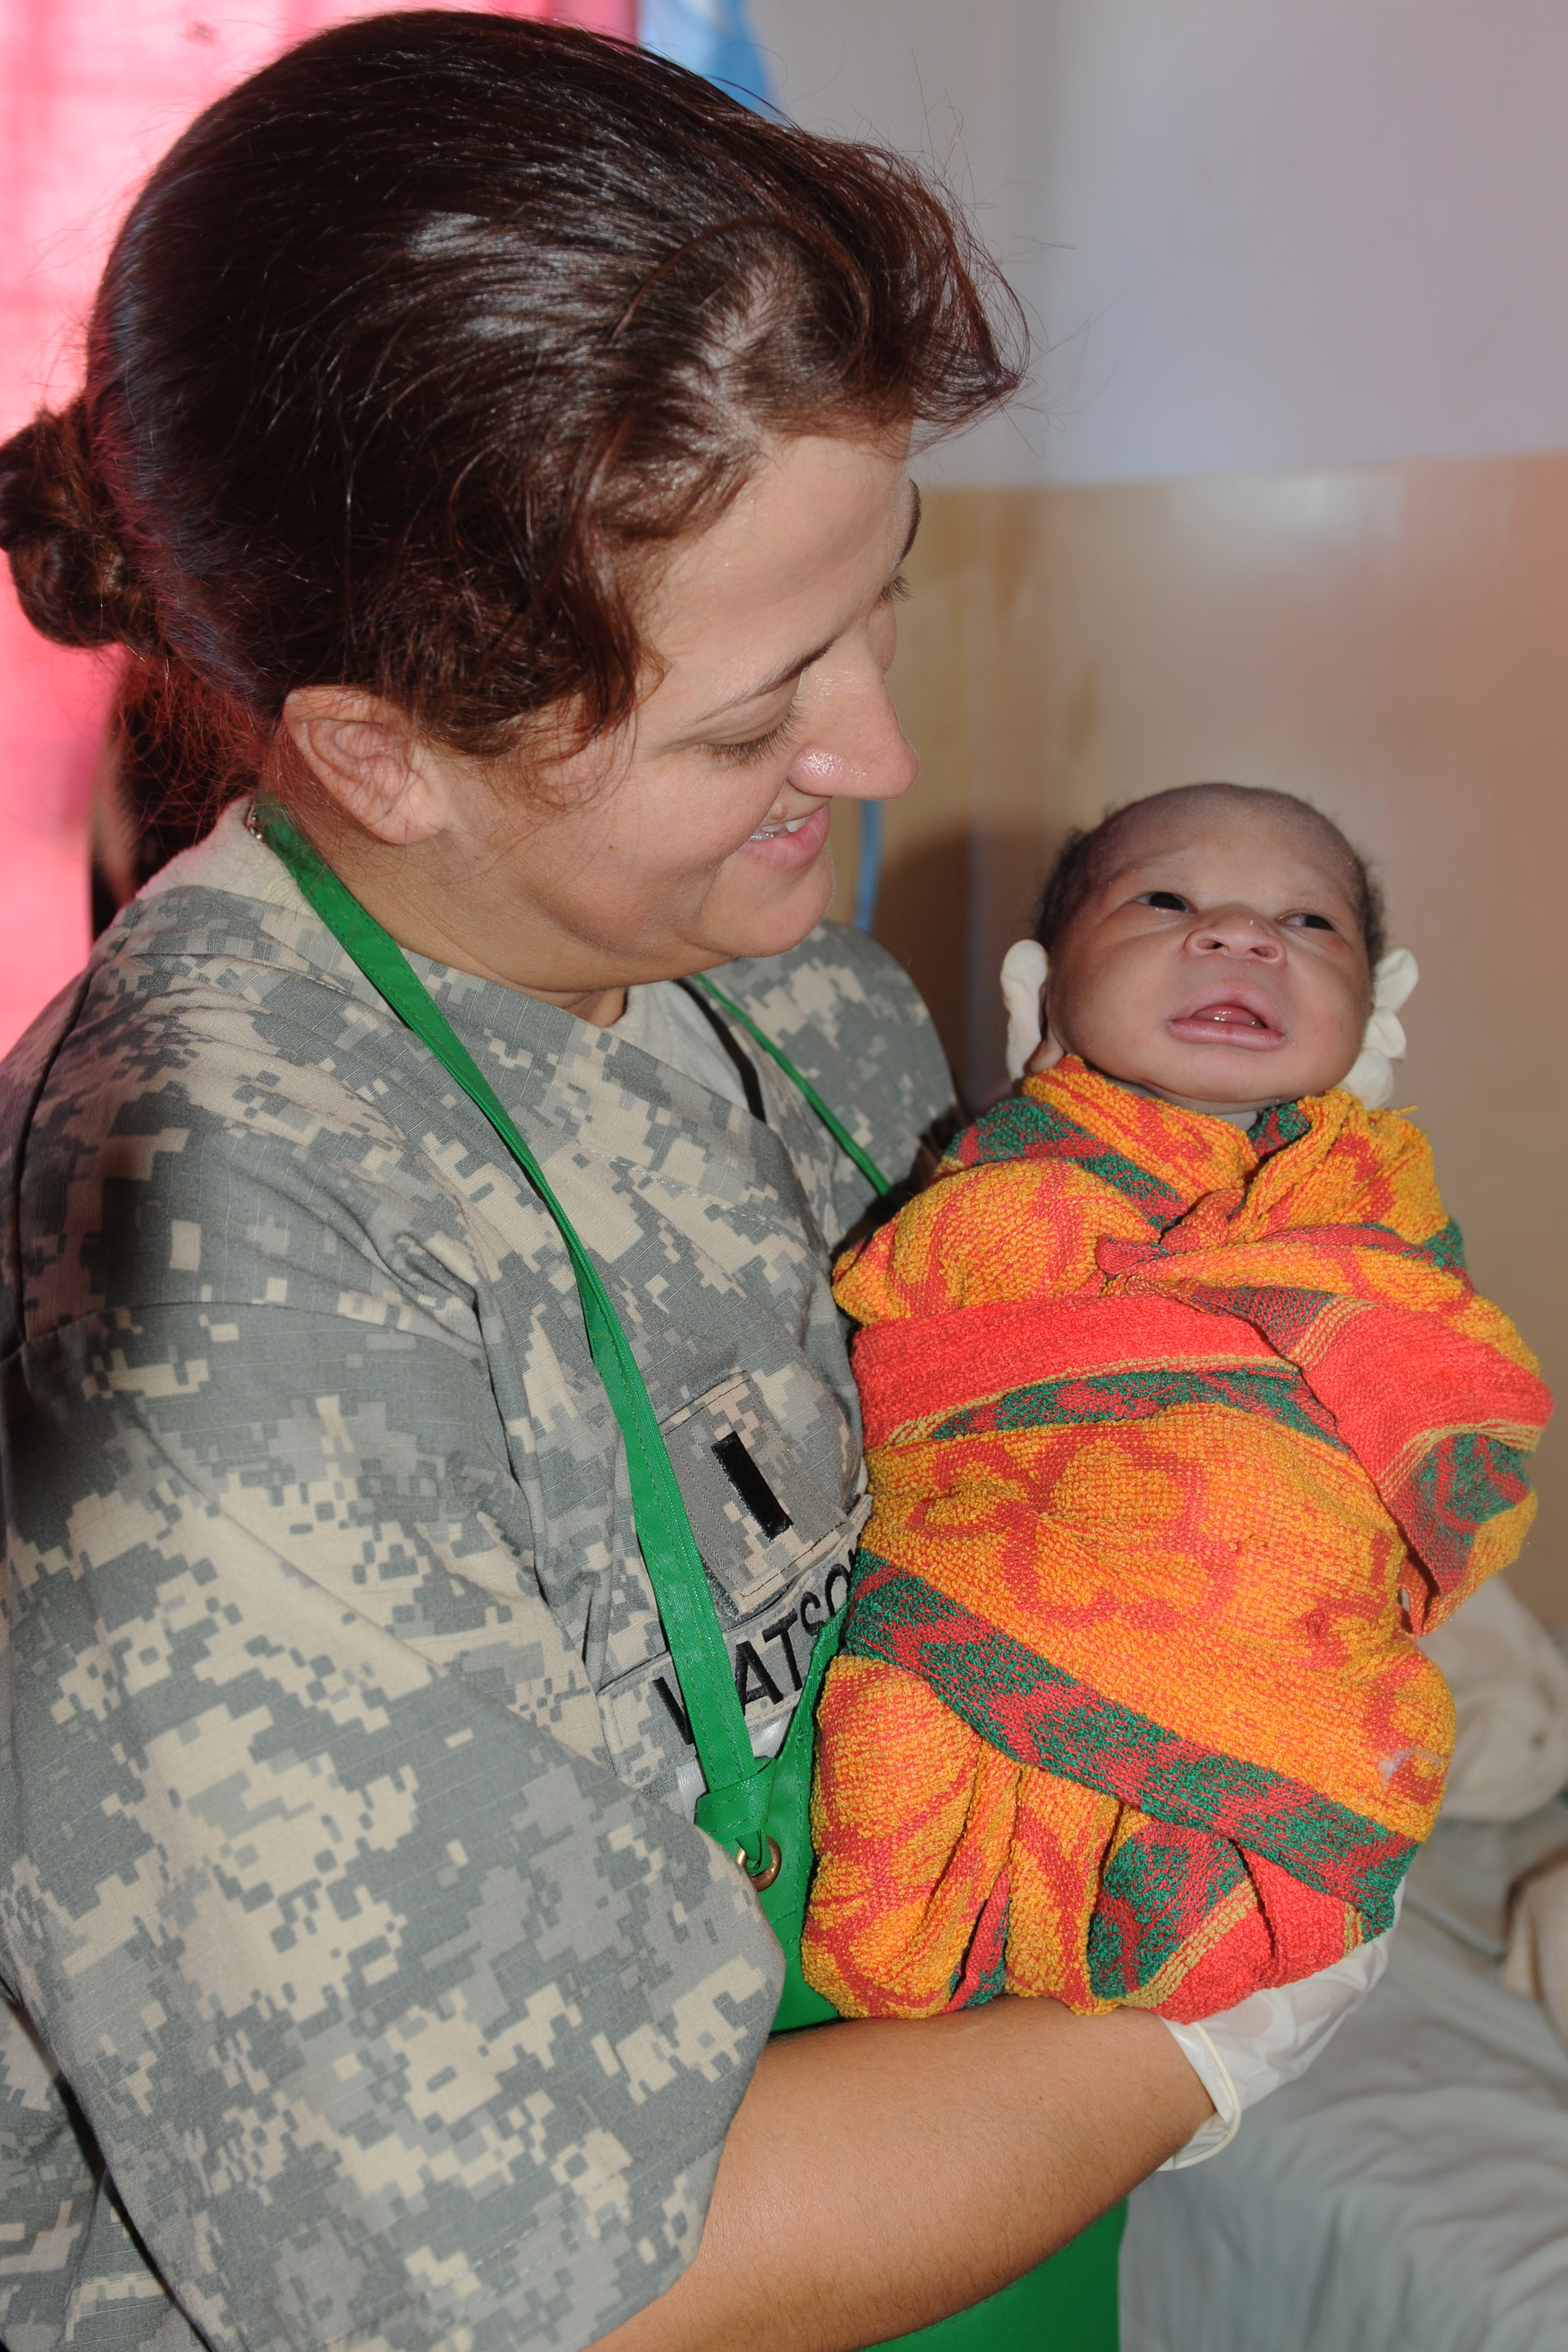 Army Reserve Nurse Delivers Baby in Rural Uganda - United States Army Africa - Natural Fire 10 - AFRICOM